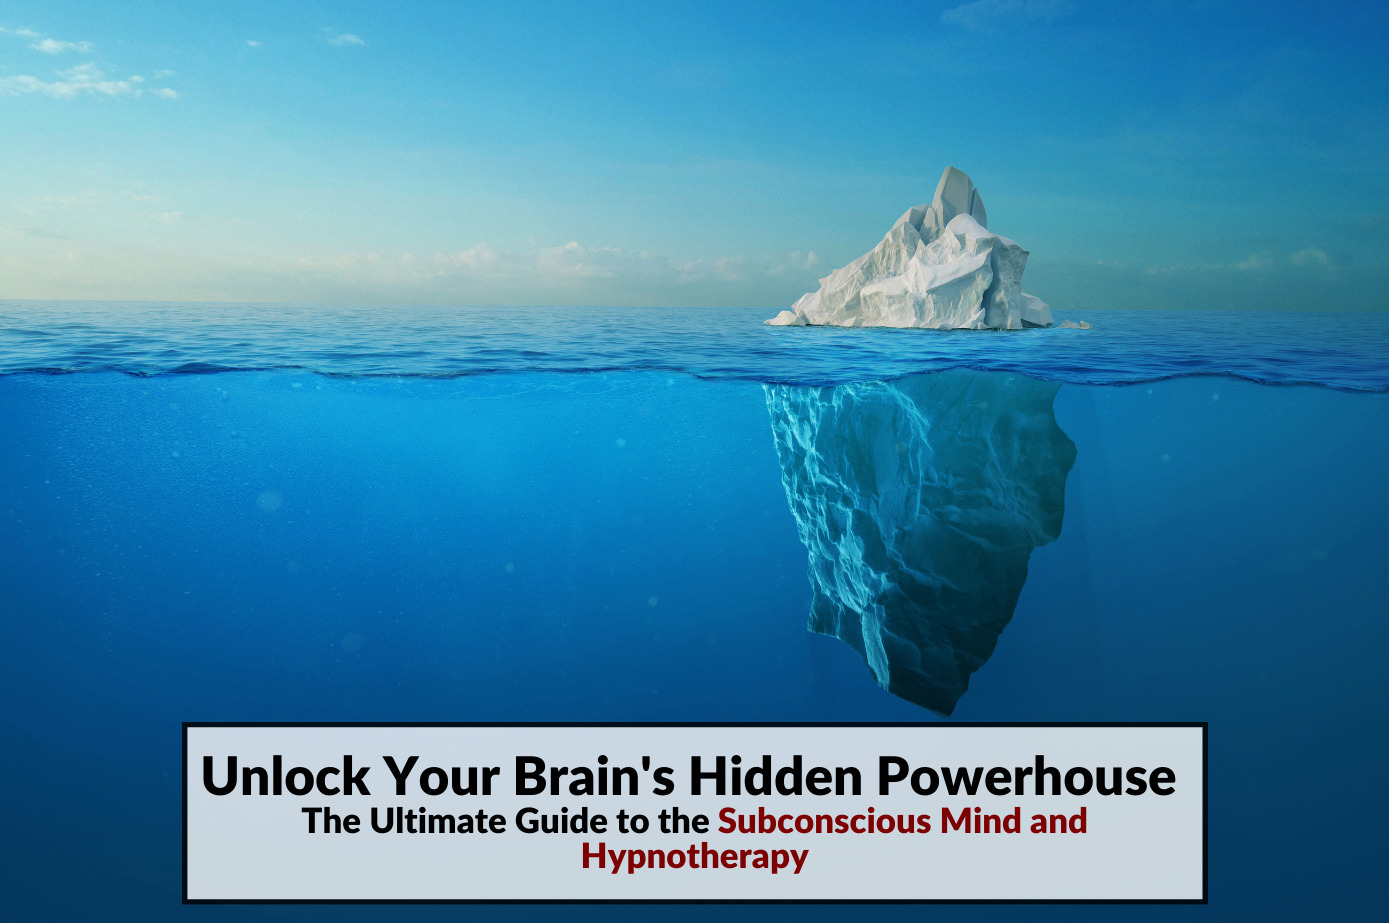 Iceberg model based on Freud's Theory of the Mind, with most of the iceberg submerged beneath the water, representing the subconscious. Article title is superimposed.